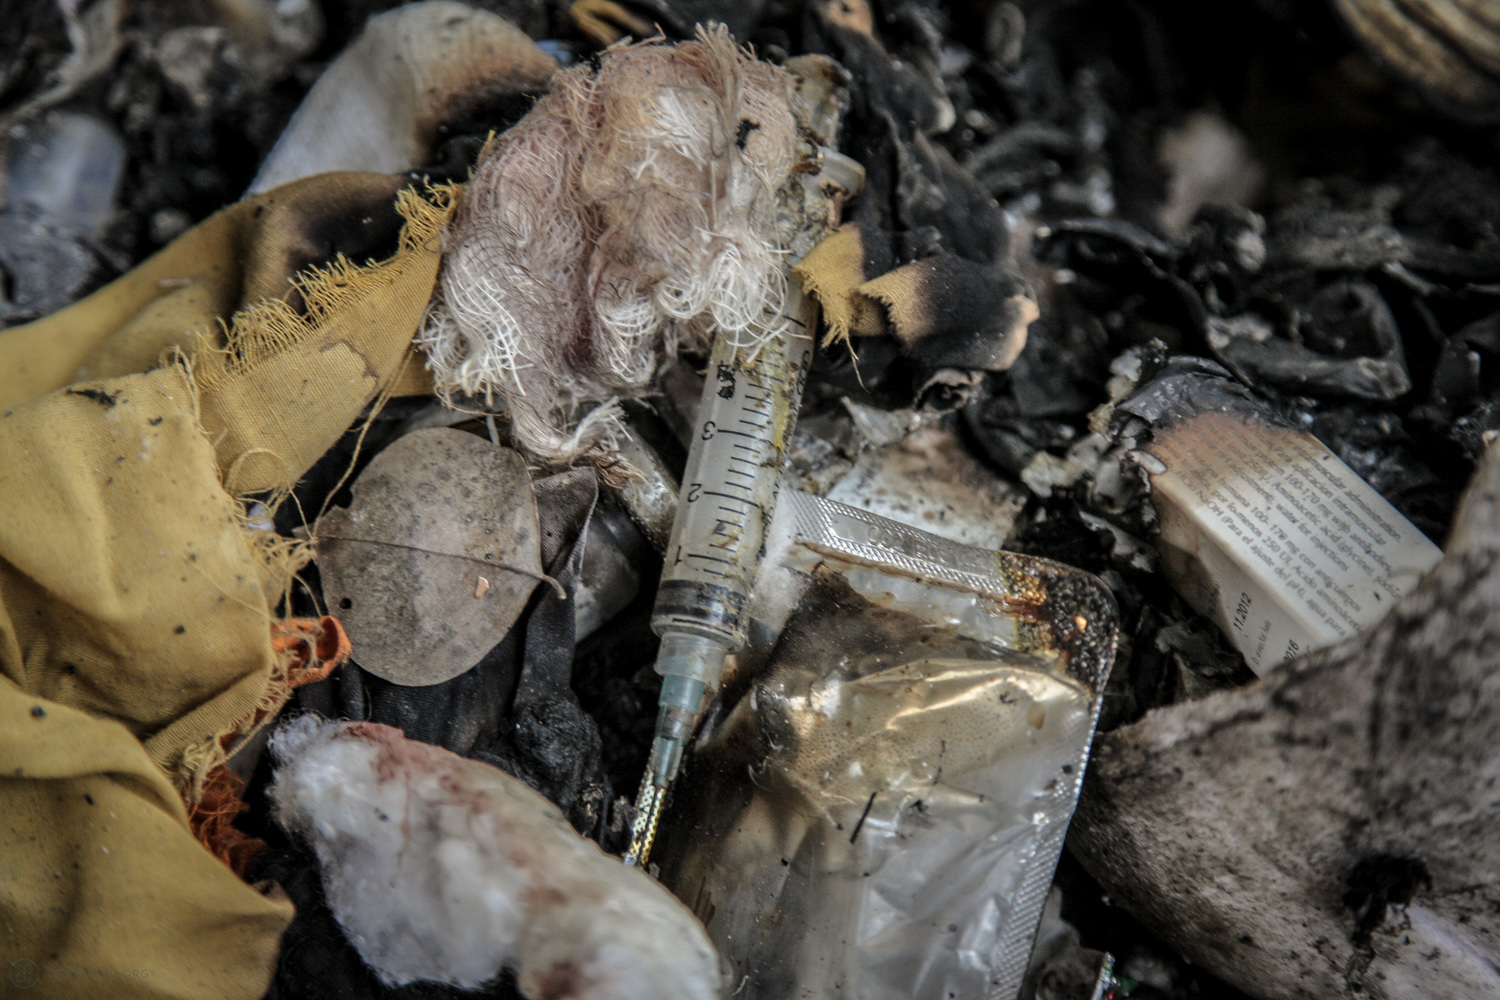  One of thousands of used needles poking out of the waste pile 